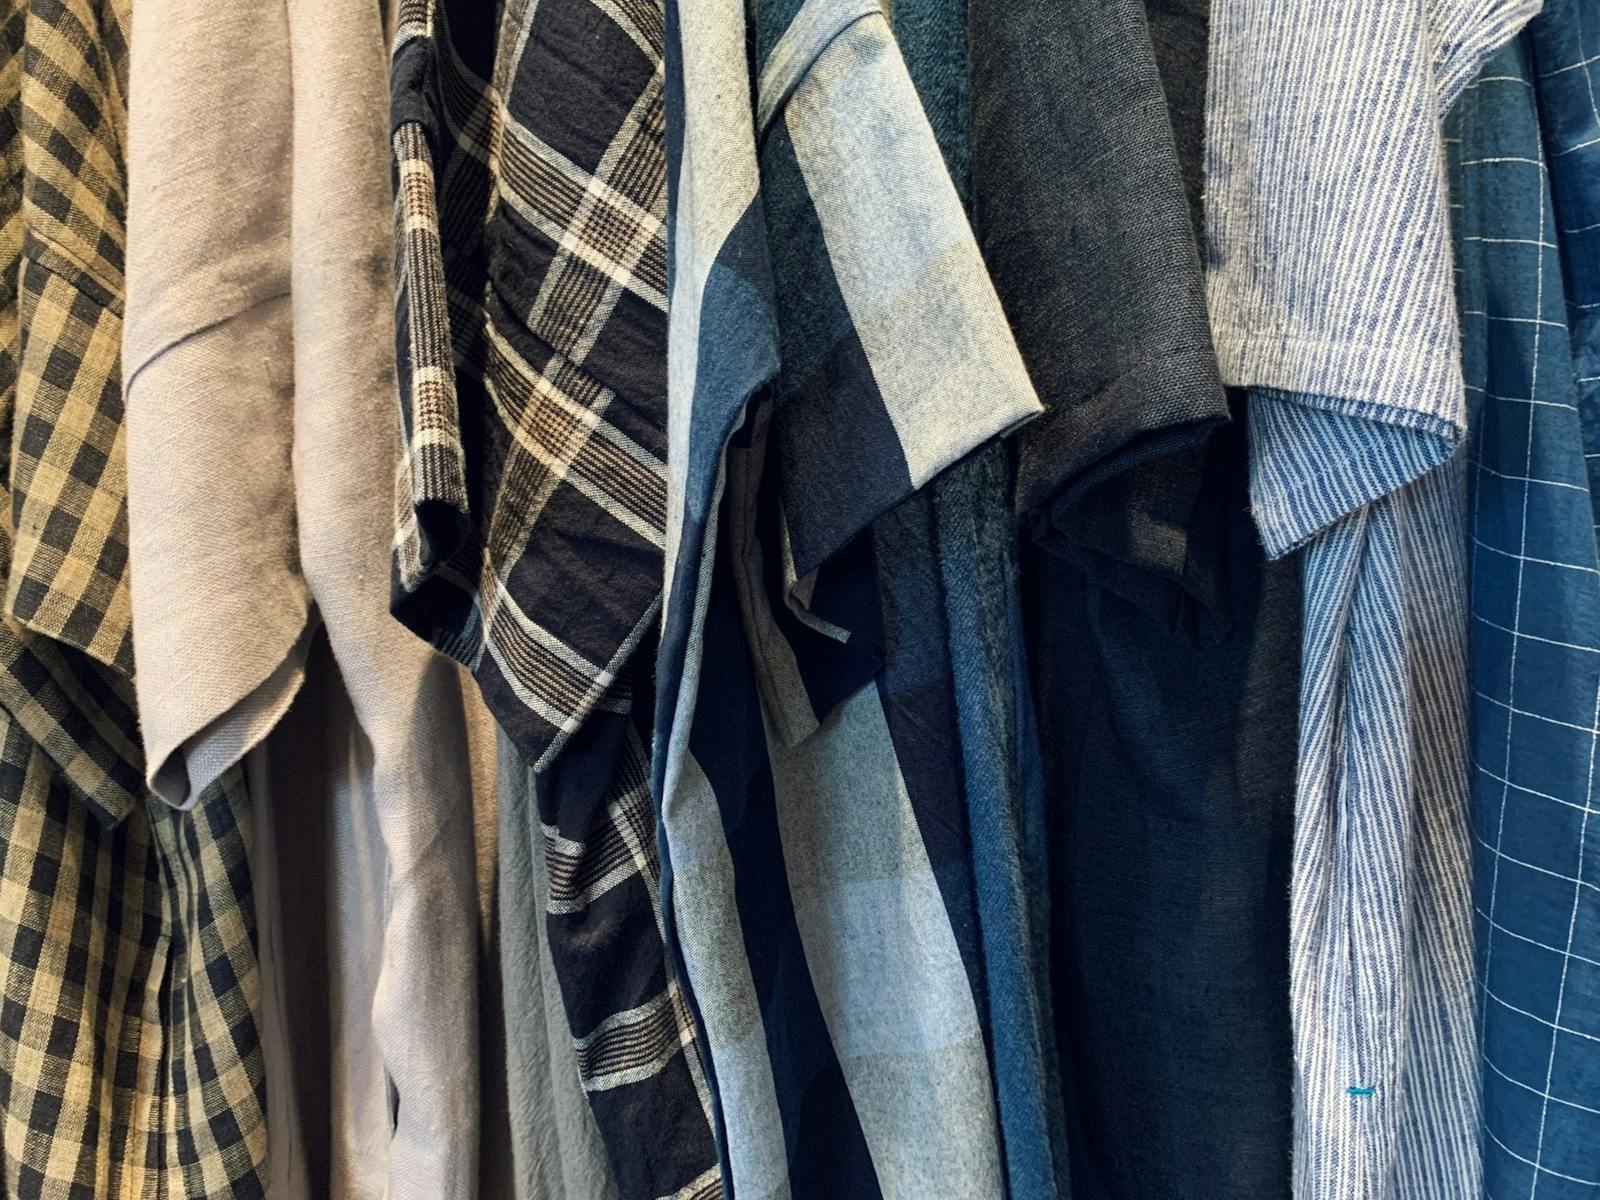 Different colours and textures of linen garments hang from the racks at the maker